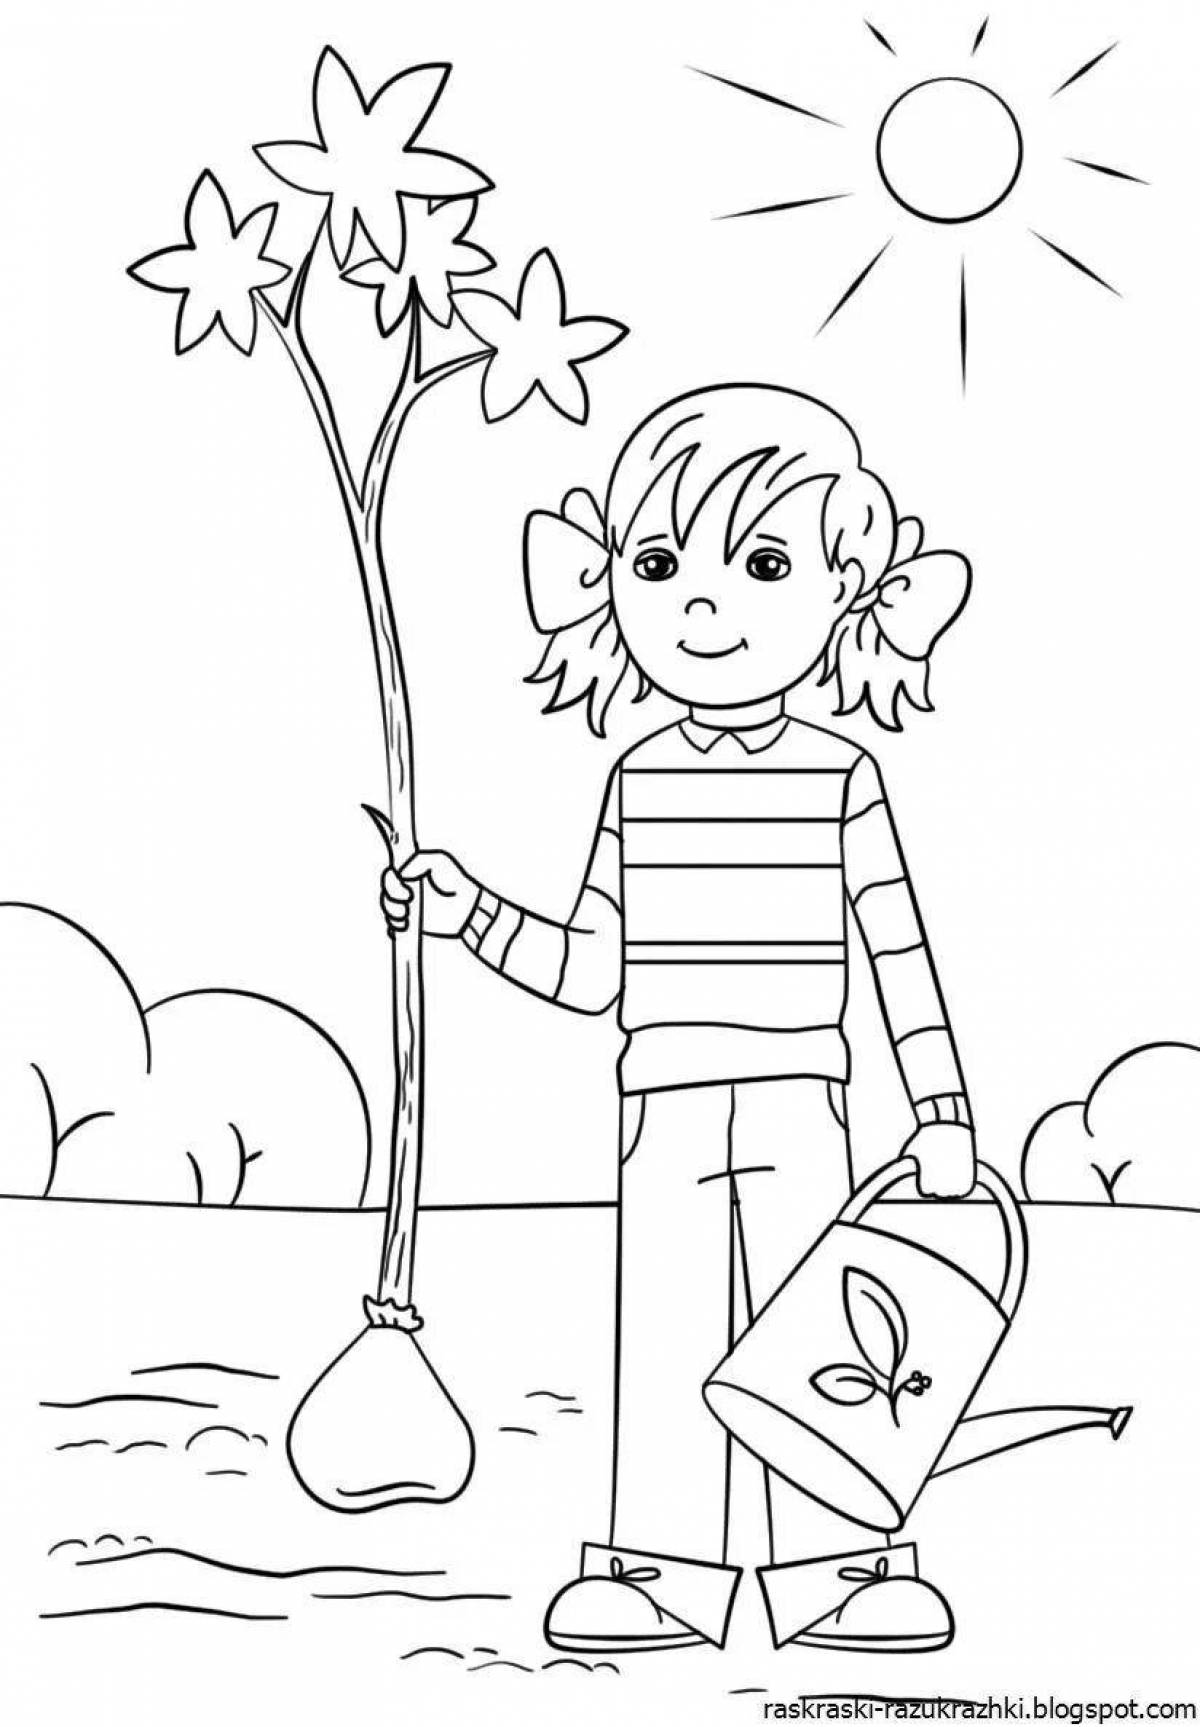 Inspirational eco coloring book for kids